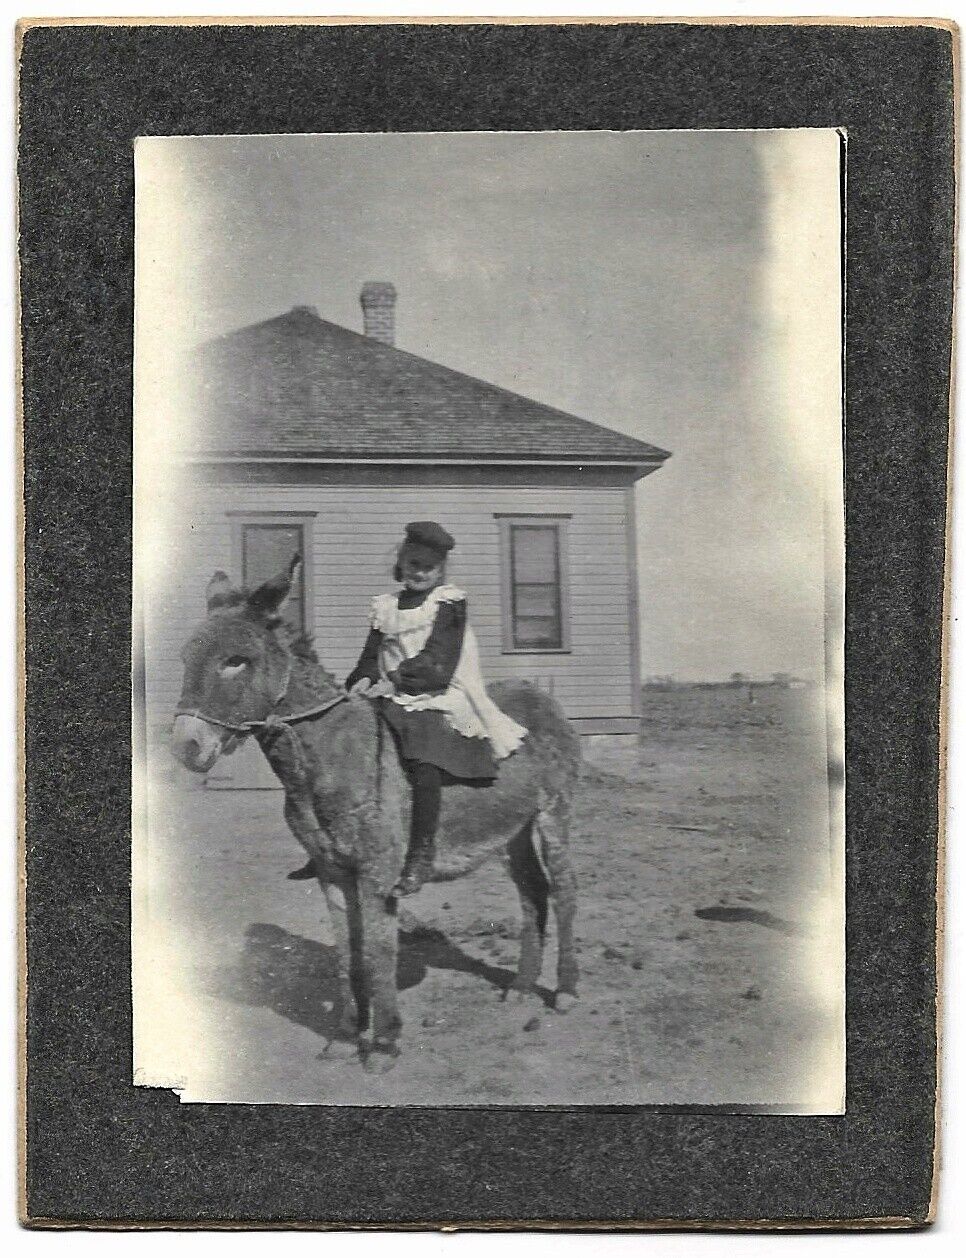 Vintage Old CDV Photo of Little Girl Riding a Donkey by House Selma California 